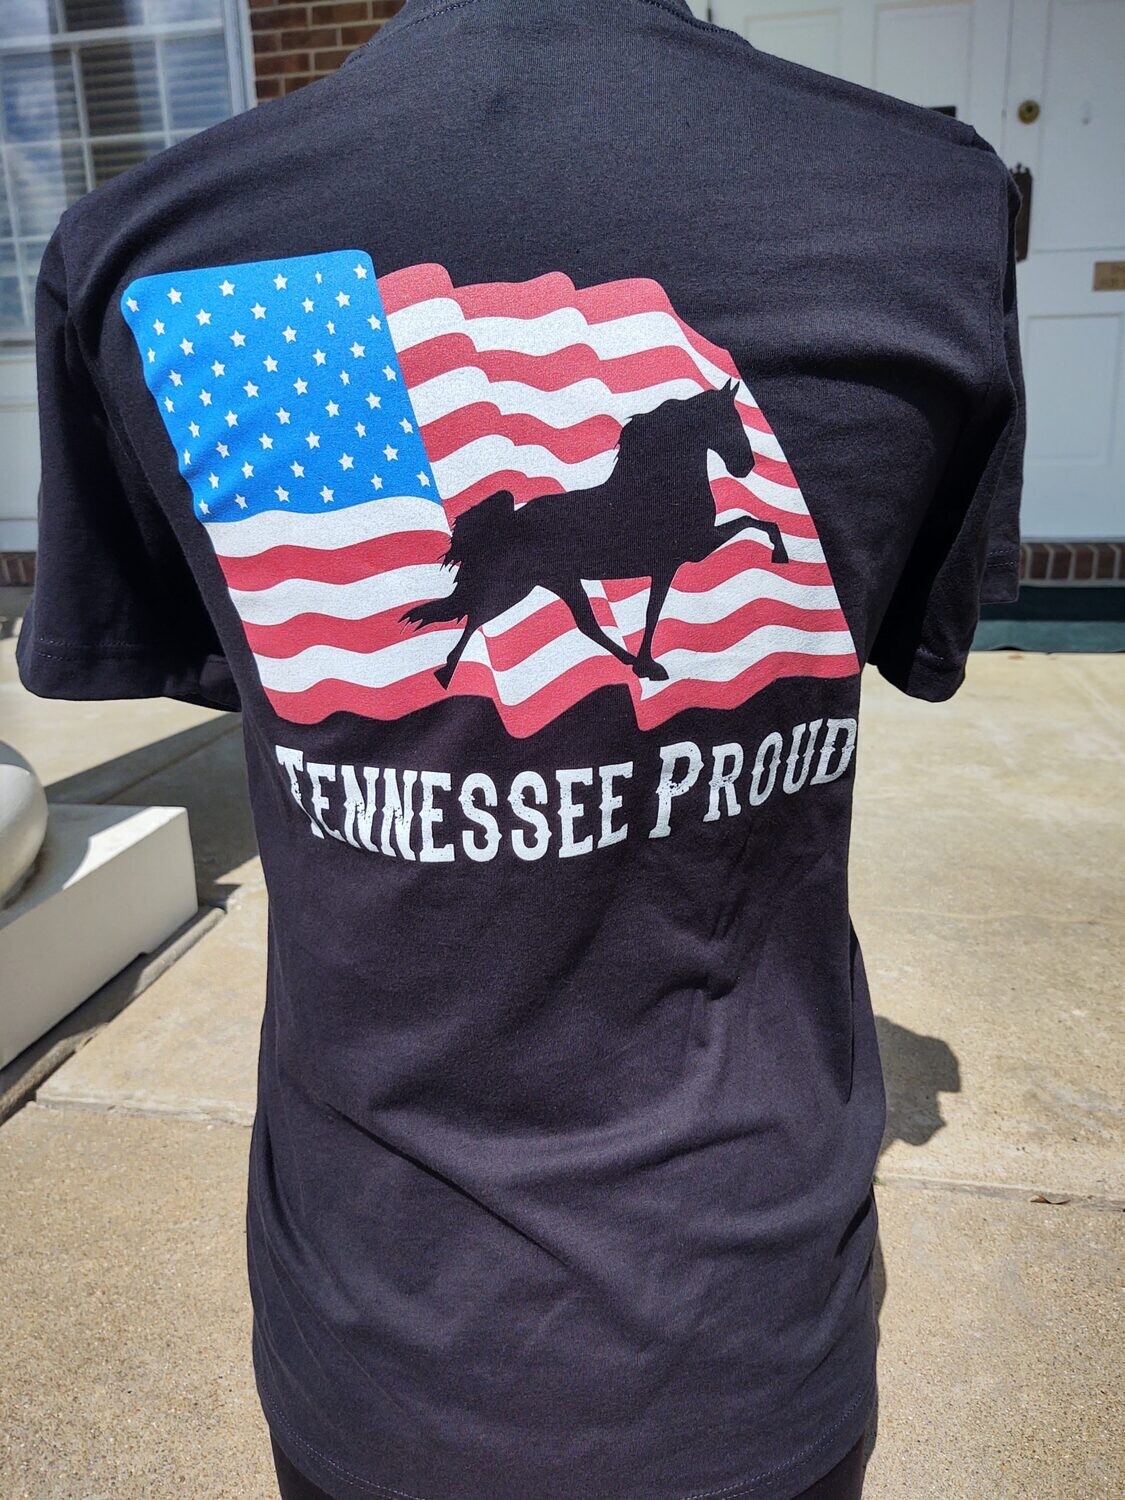 Tennessee Proud